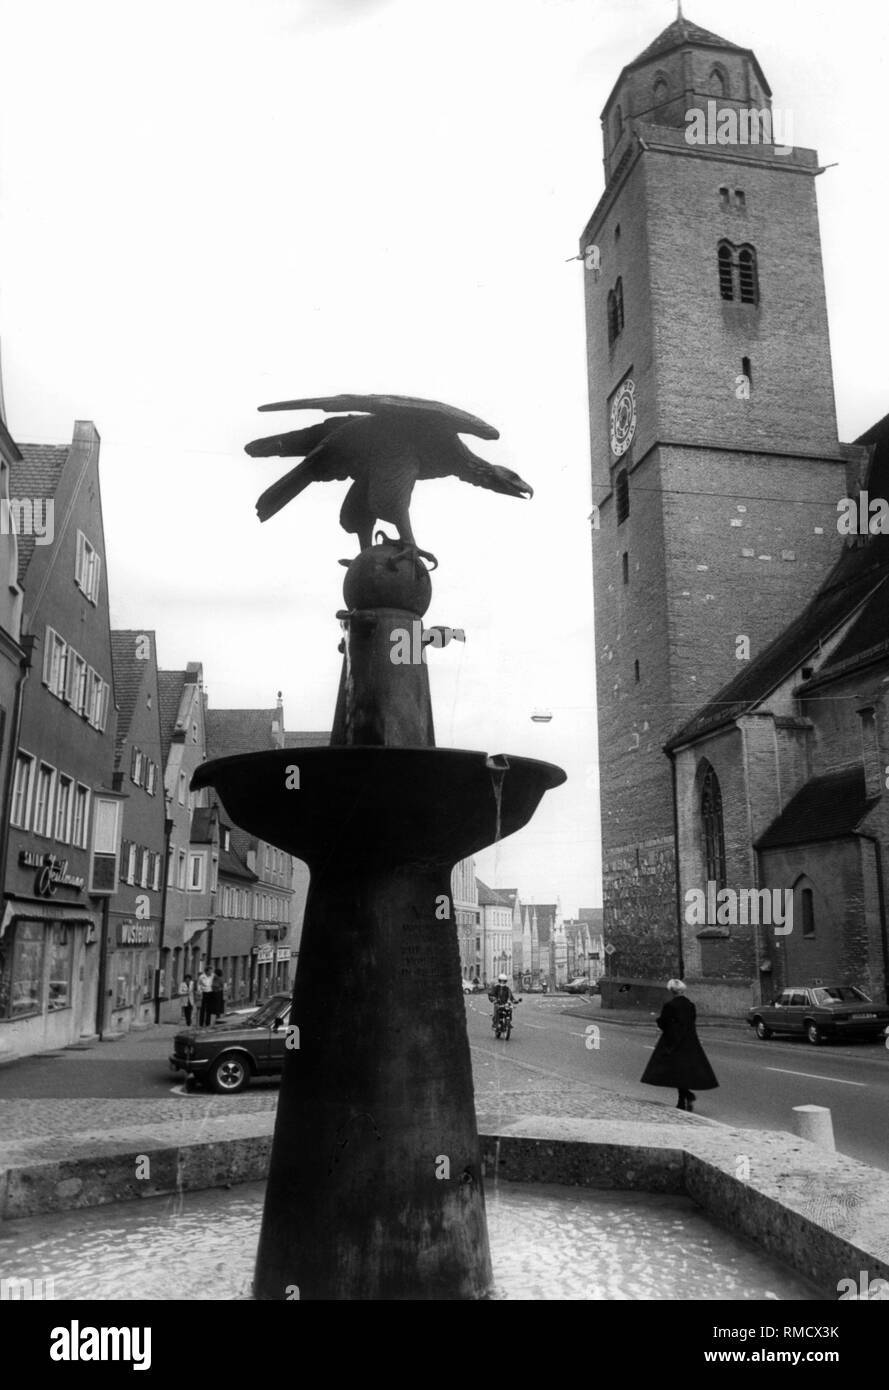 Fountain in Donauwoerth. In the background is the tower of the parish church (undated shot). Stock Photo